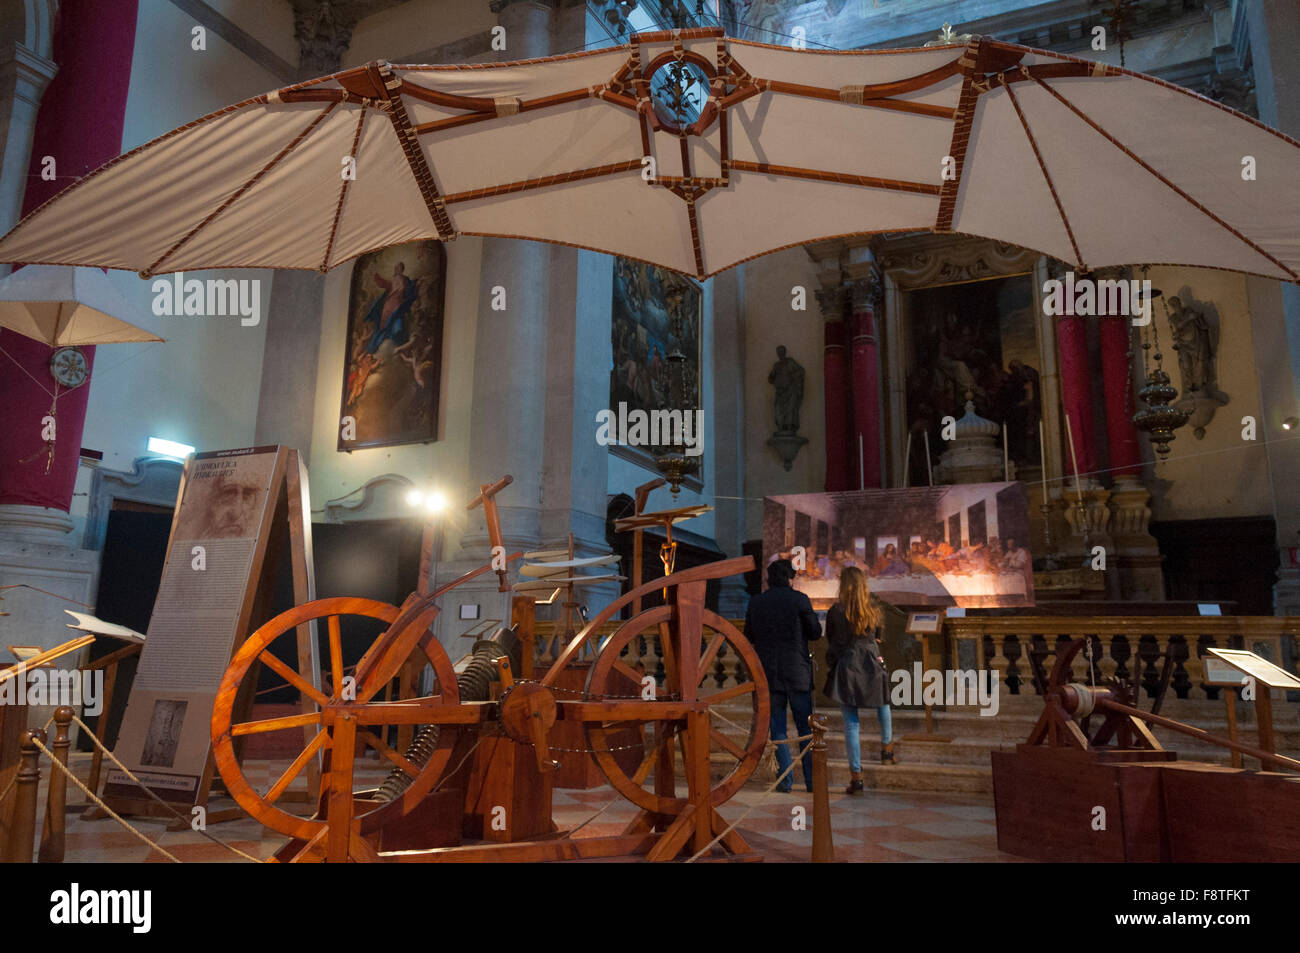 Exhibition of Da Vinci machines, bicycle shown here, Venice, Italy Stock Photo